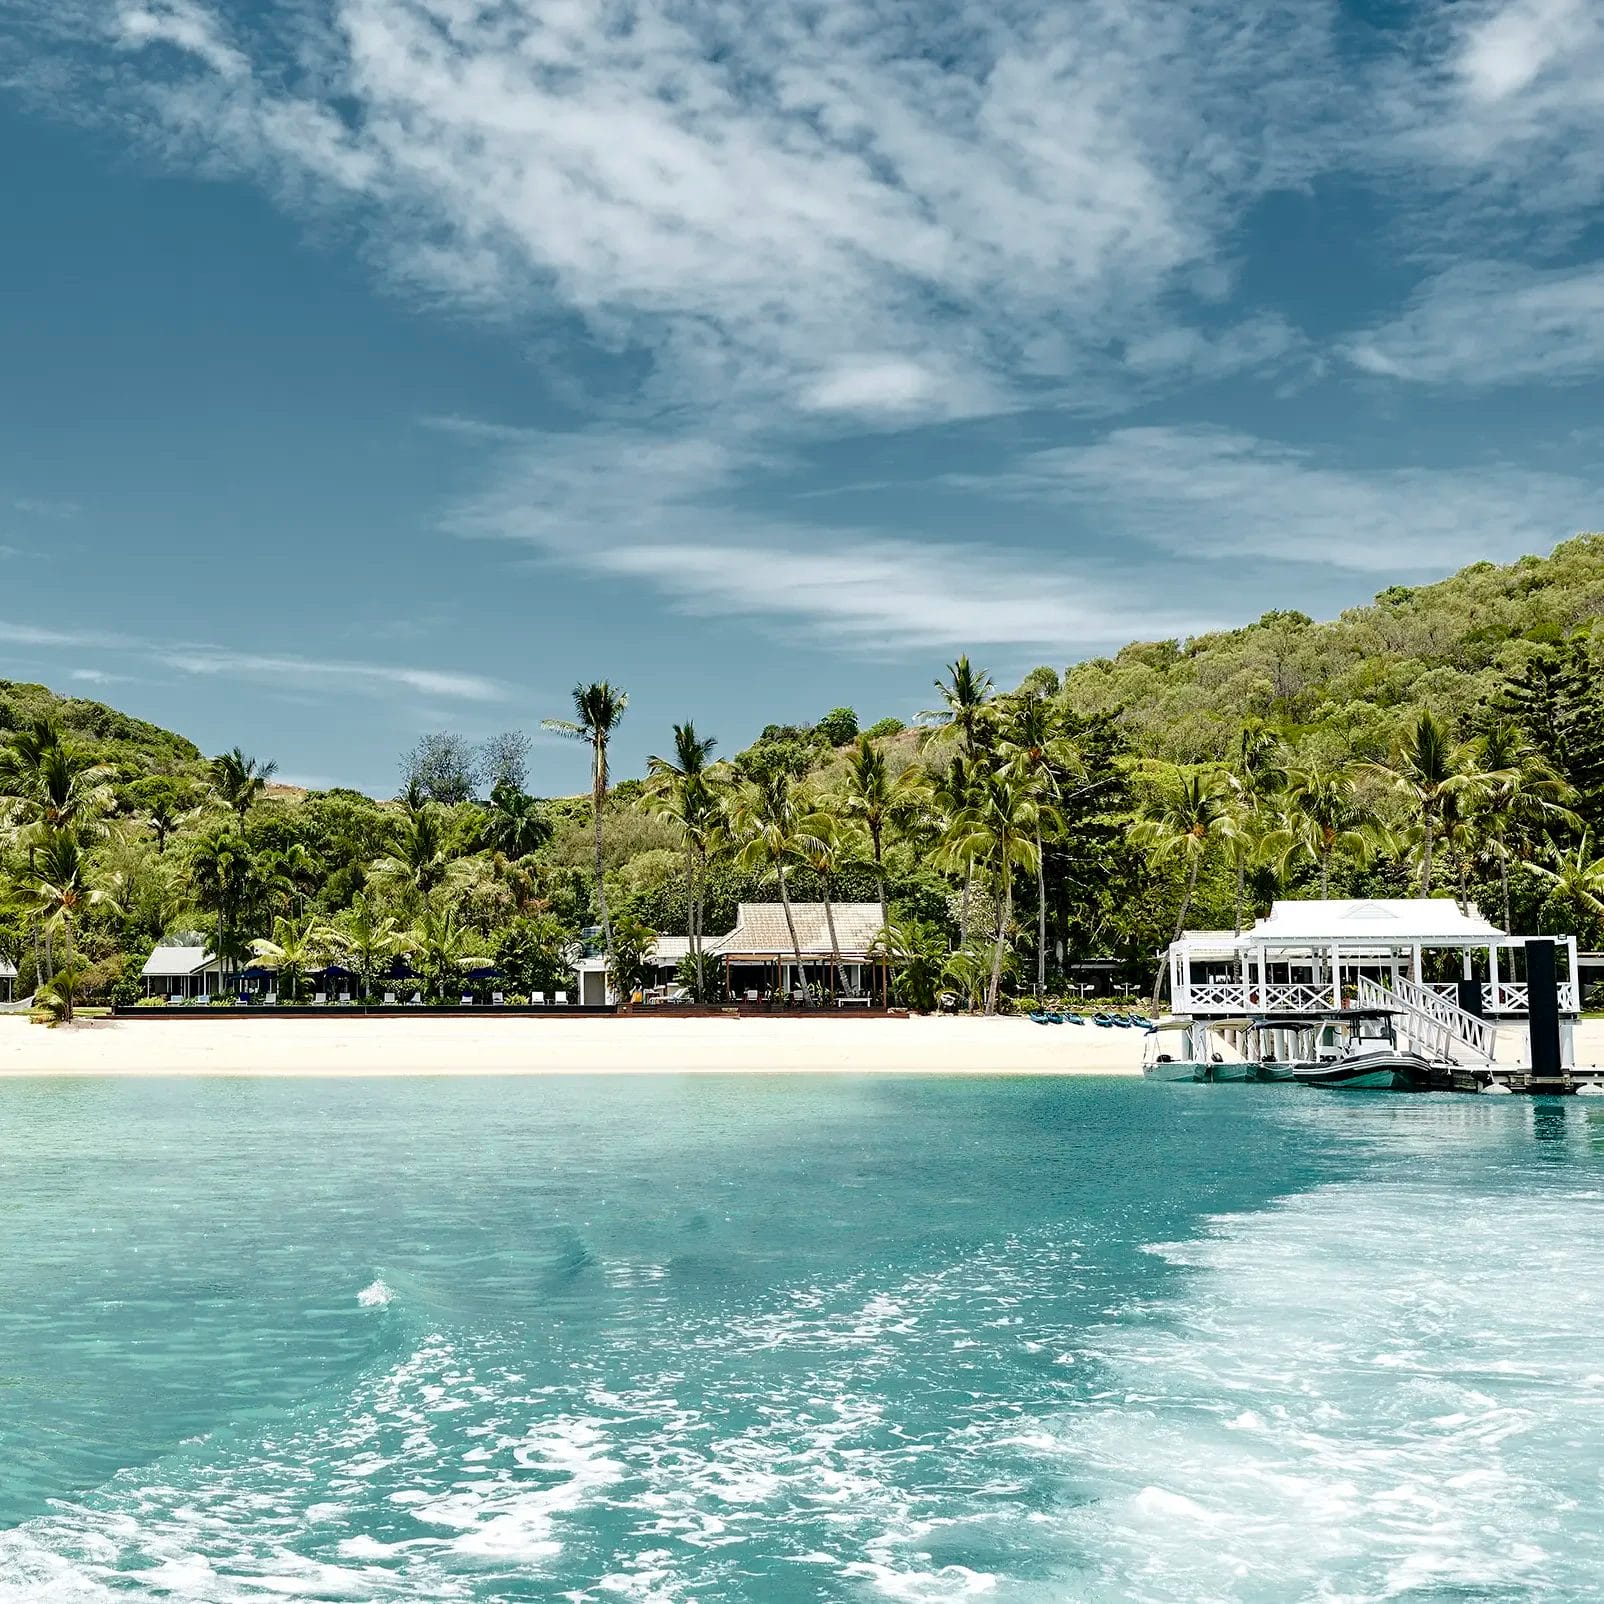 Views of Orpheus Island Lodge from the water, flanked by tropical green palms and white sand